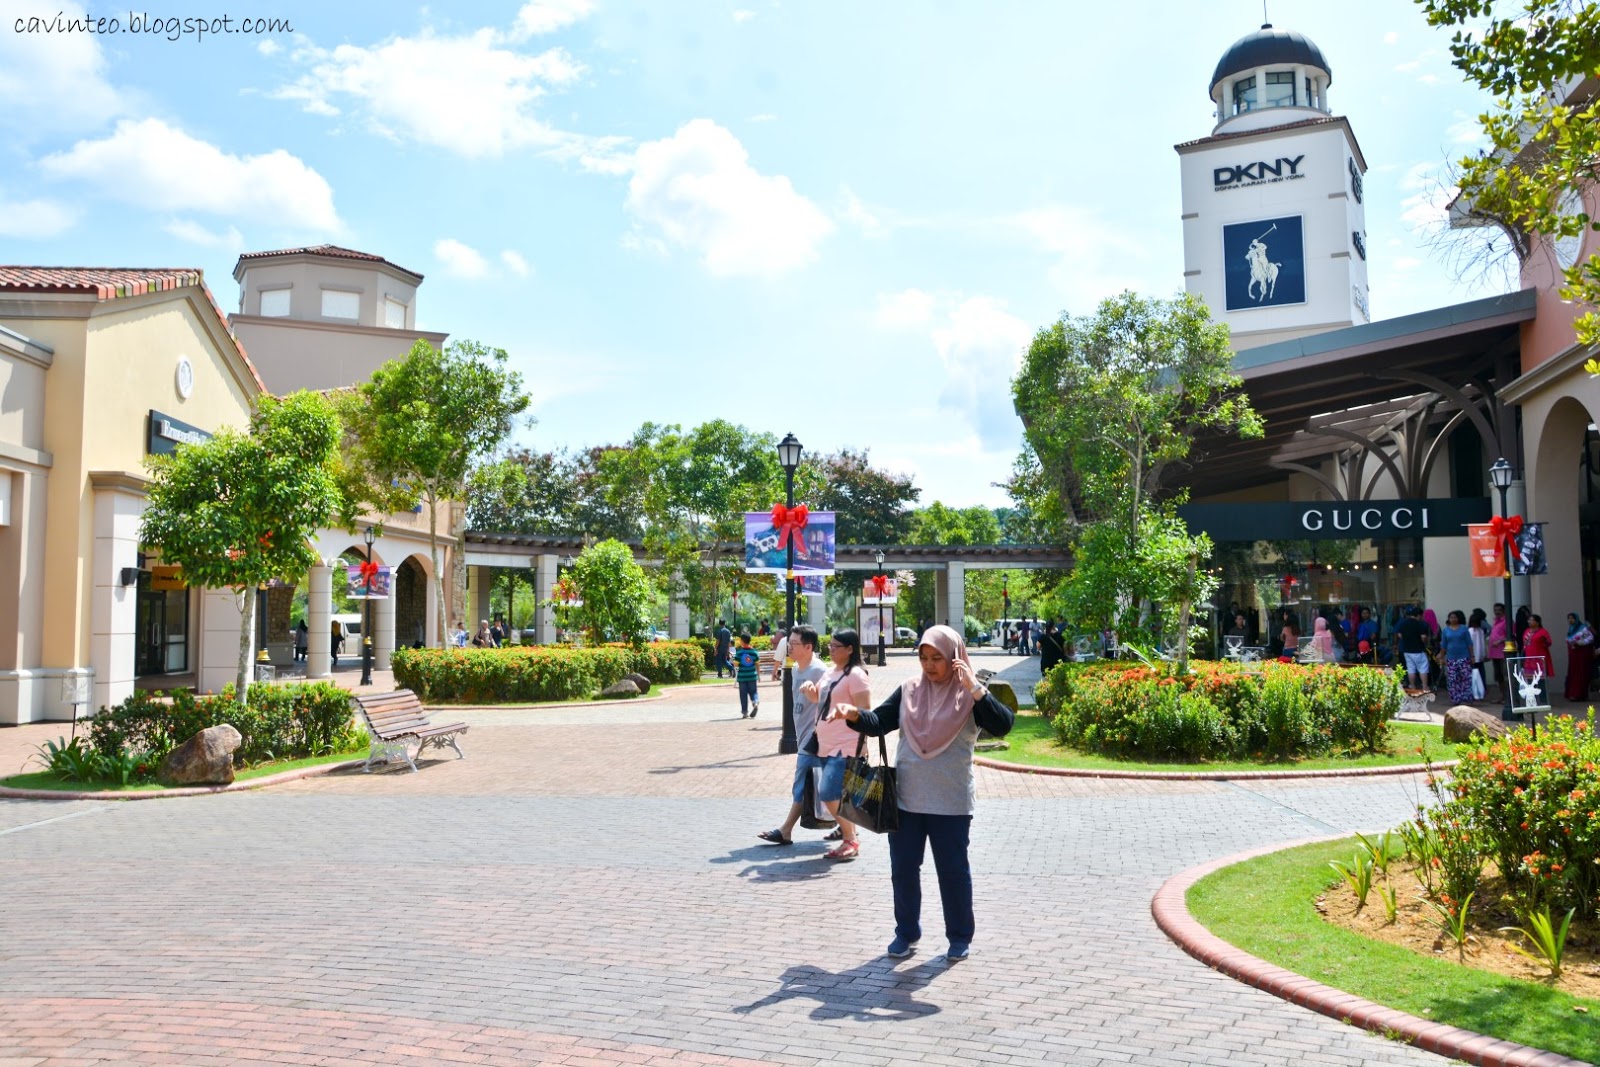 Johor Premium Outlets by ice15man